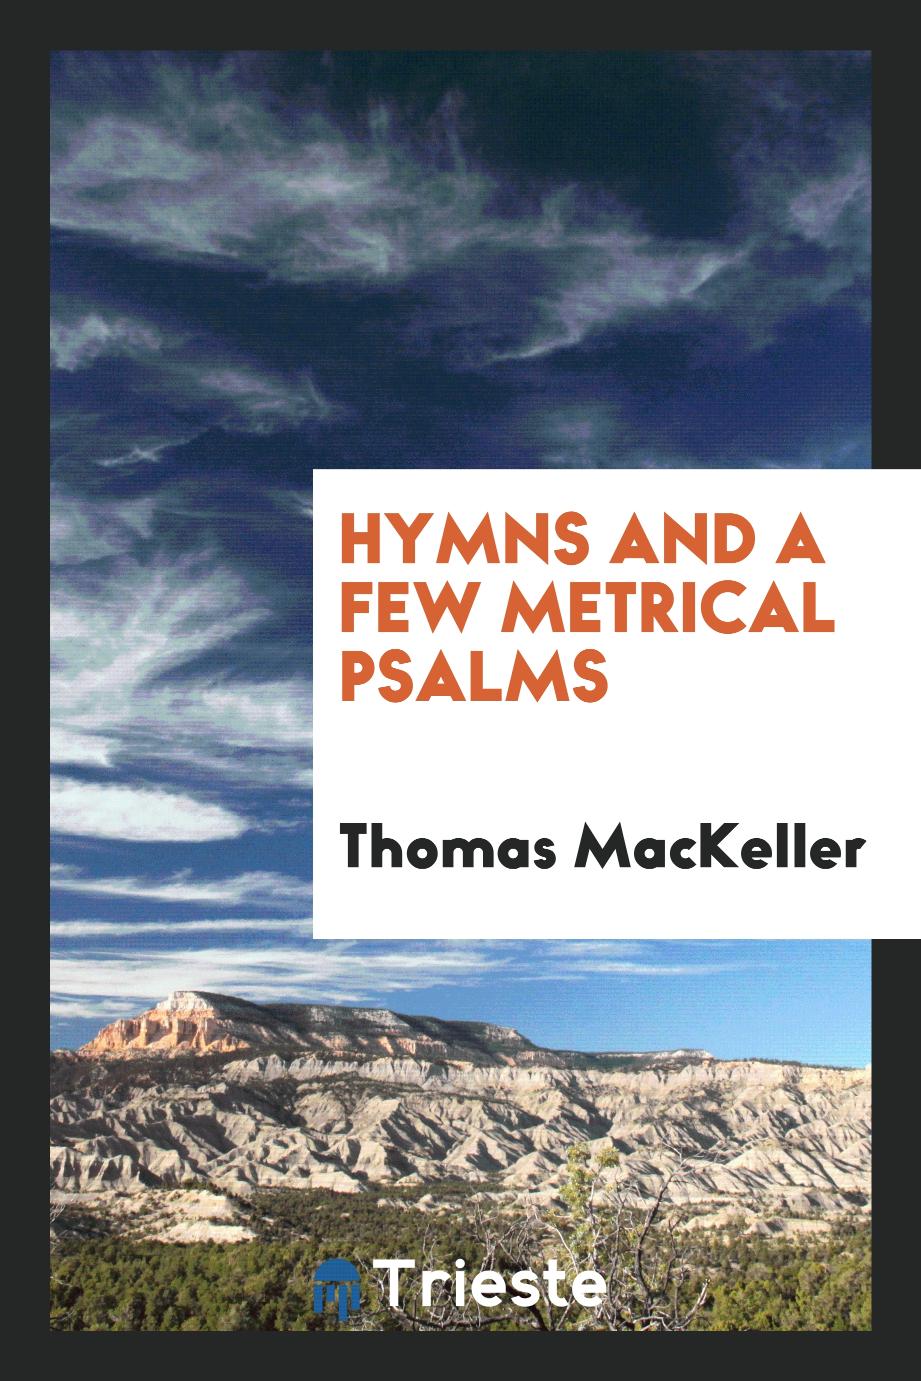 Hymns and a few metrical psalms